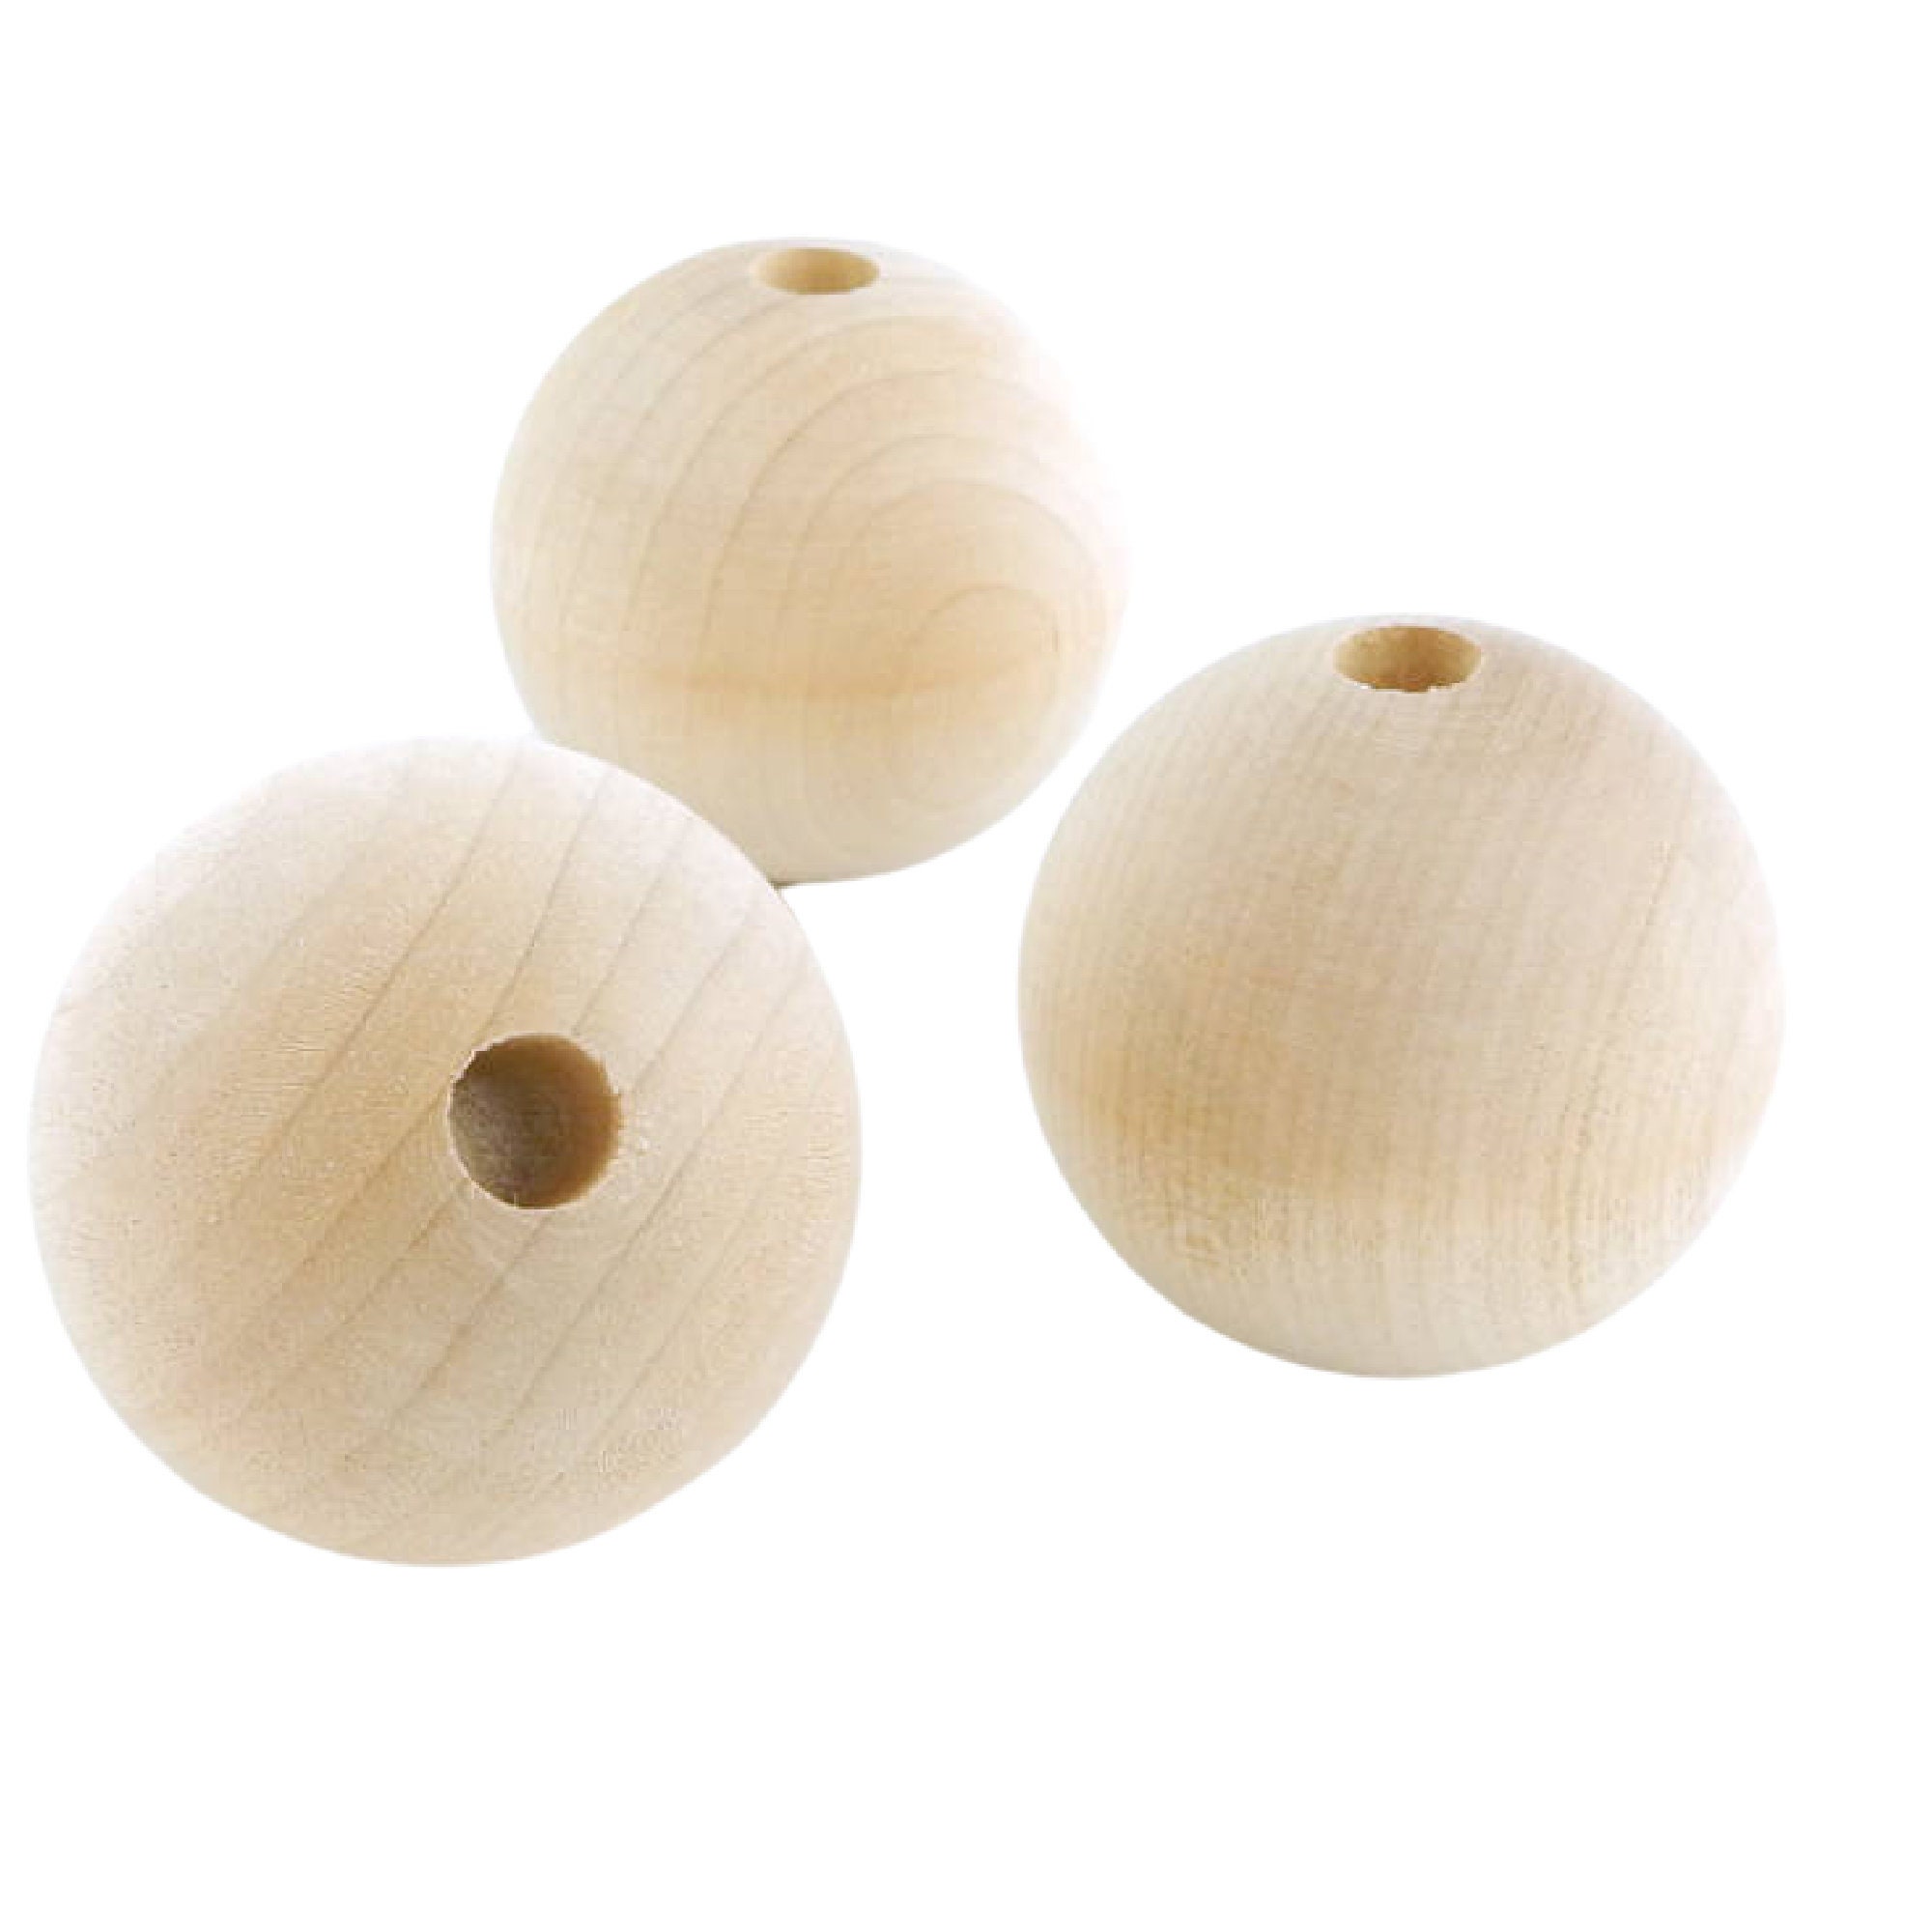 Wooden balls drilled and undrilled, fine wooden beads